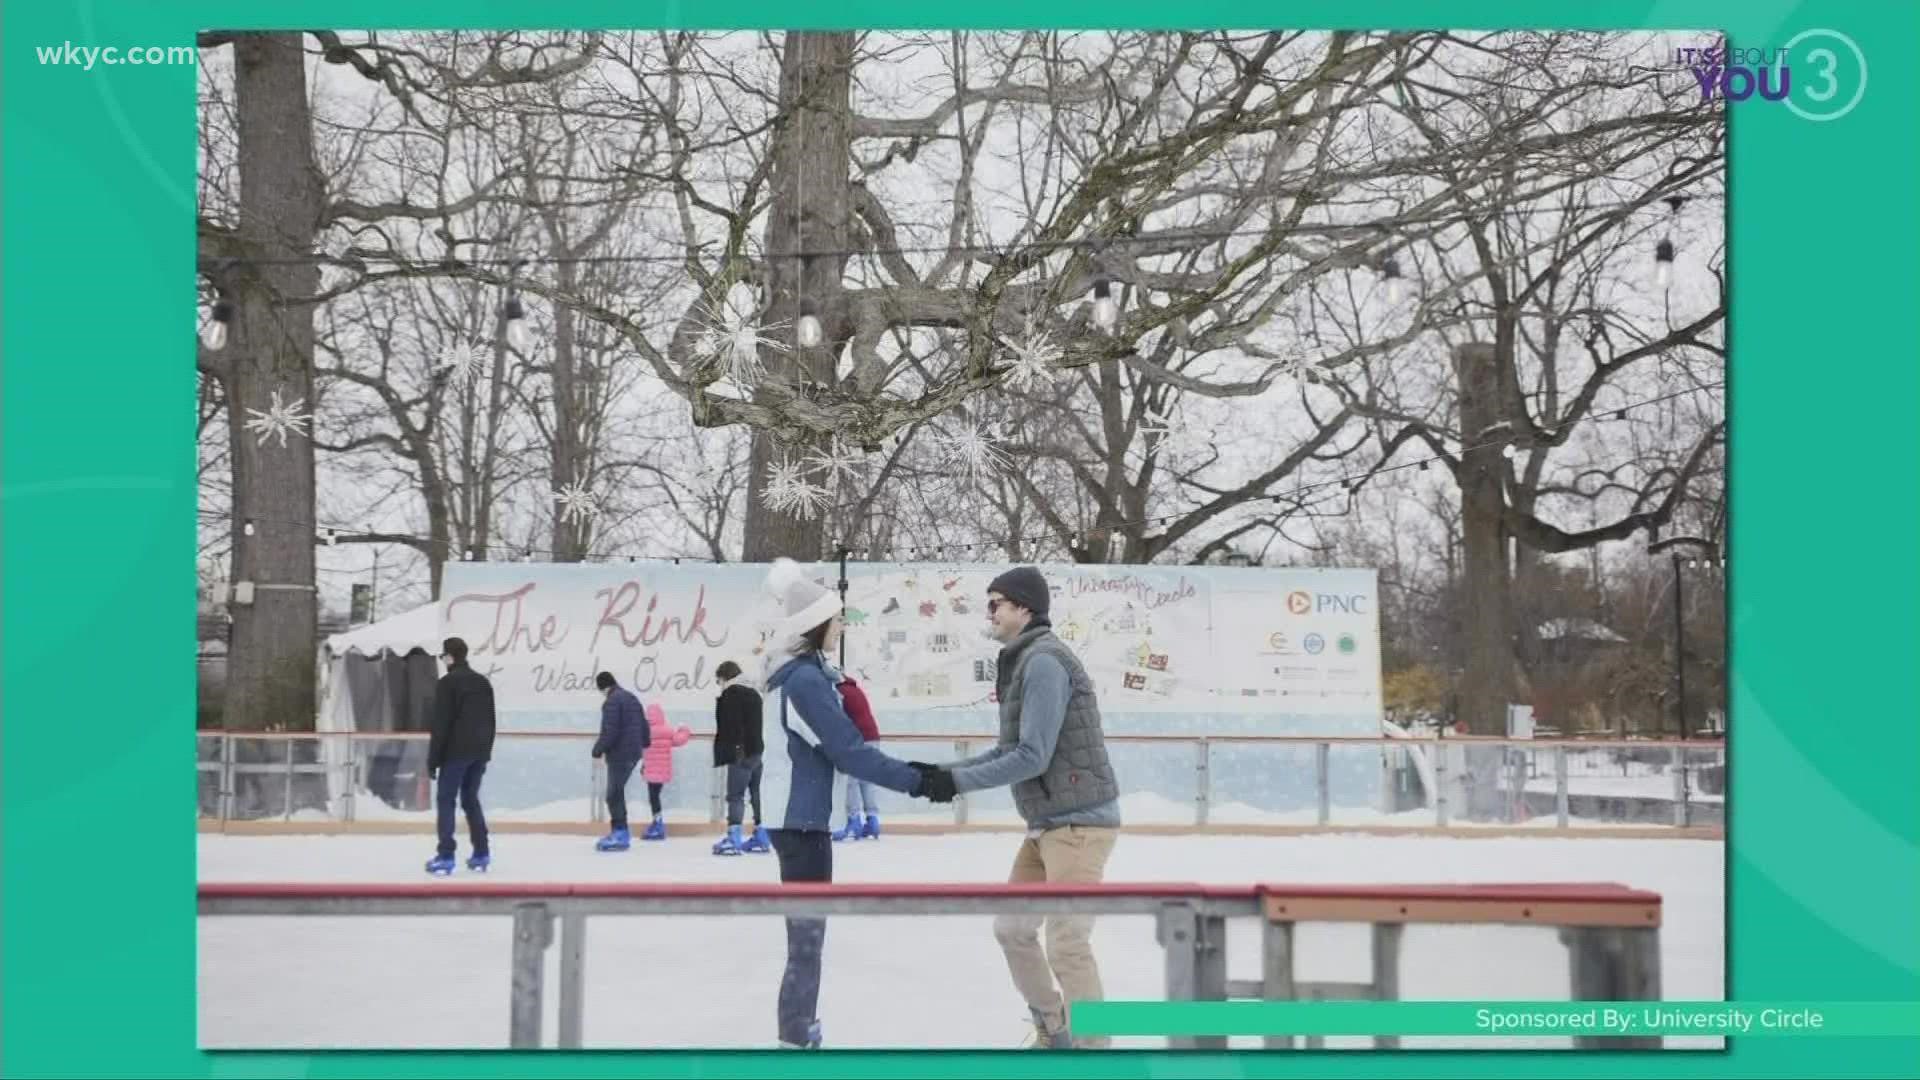 Becky Voldrich & Erin Deimling join LeeAnn and talk about the amazing ice skating attraction in University Circle!